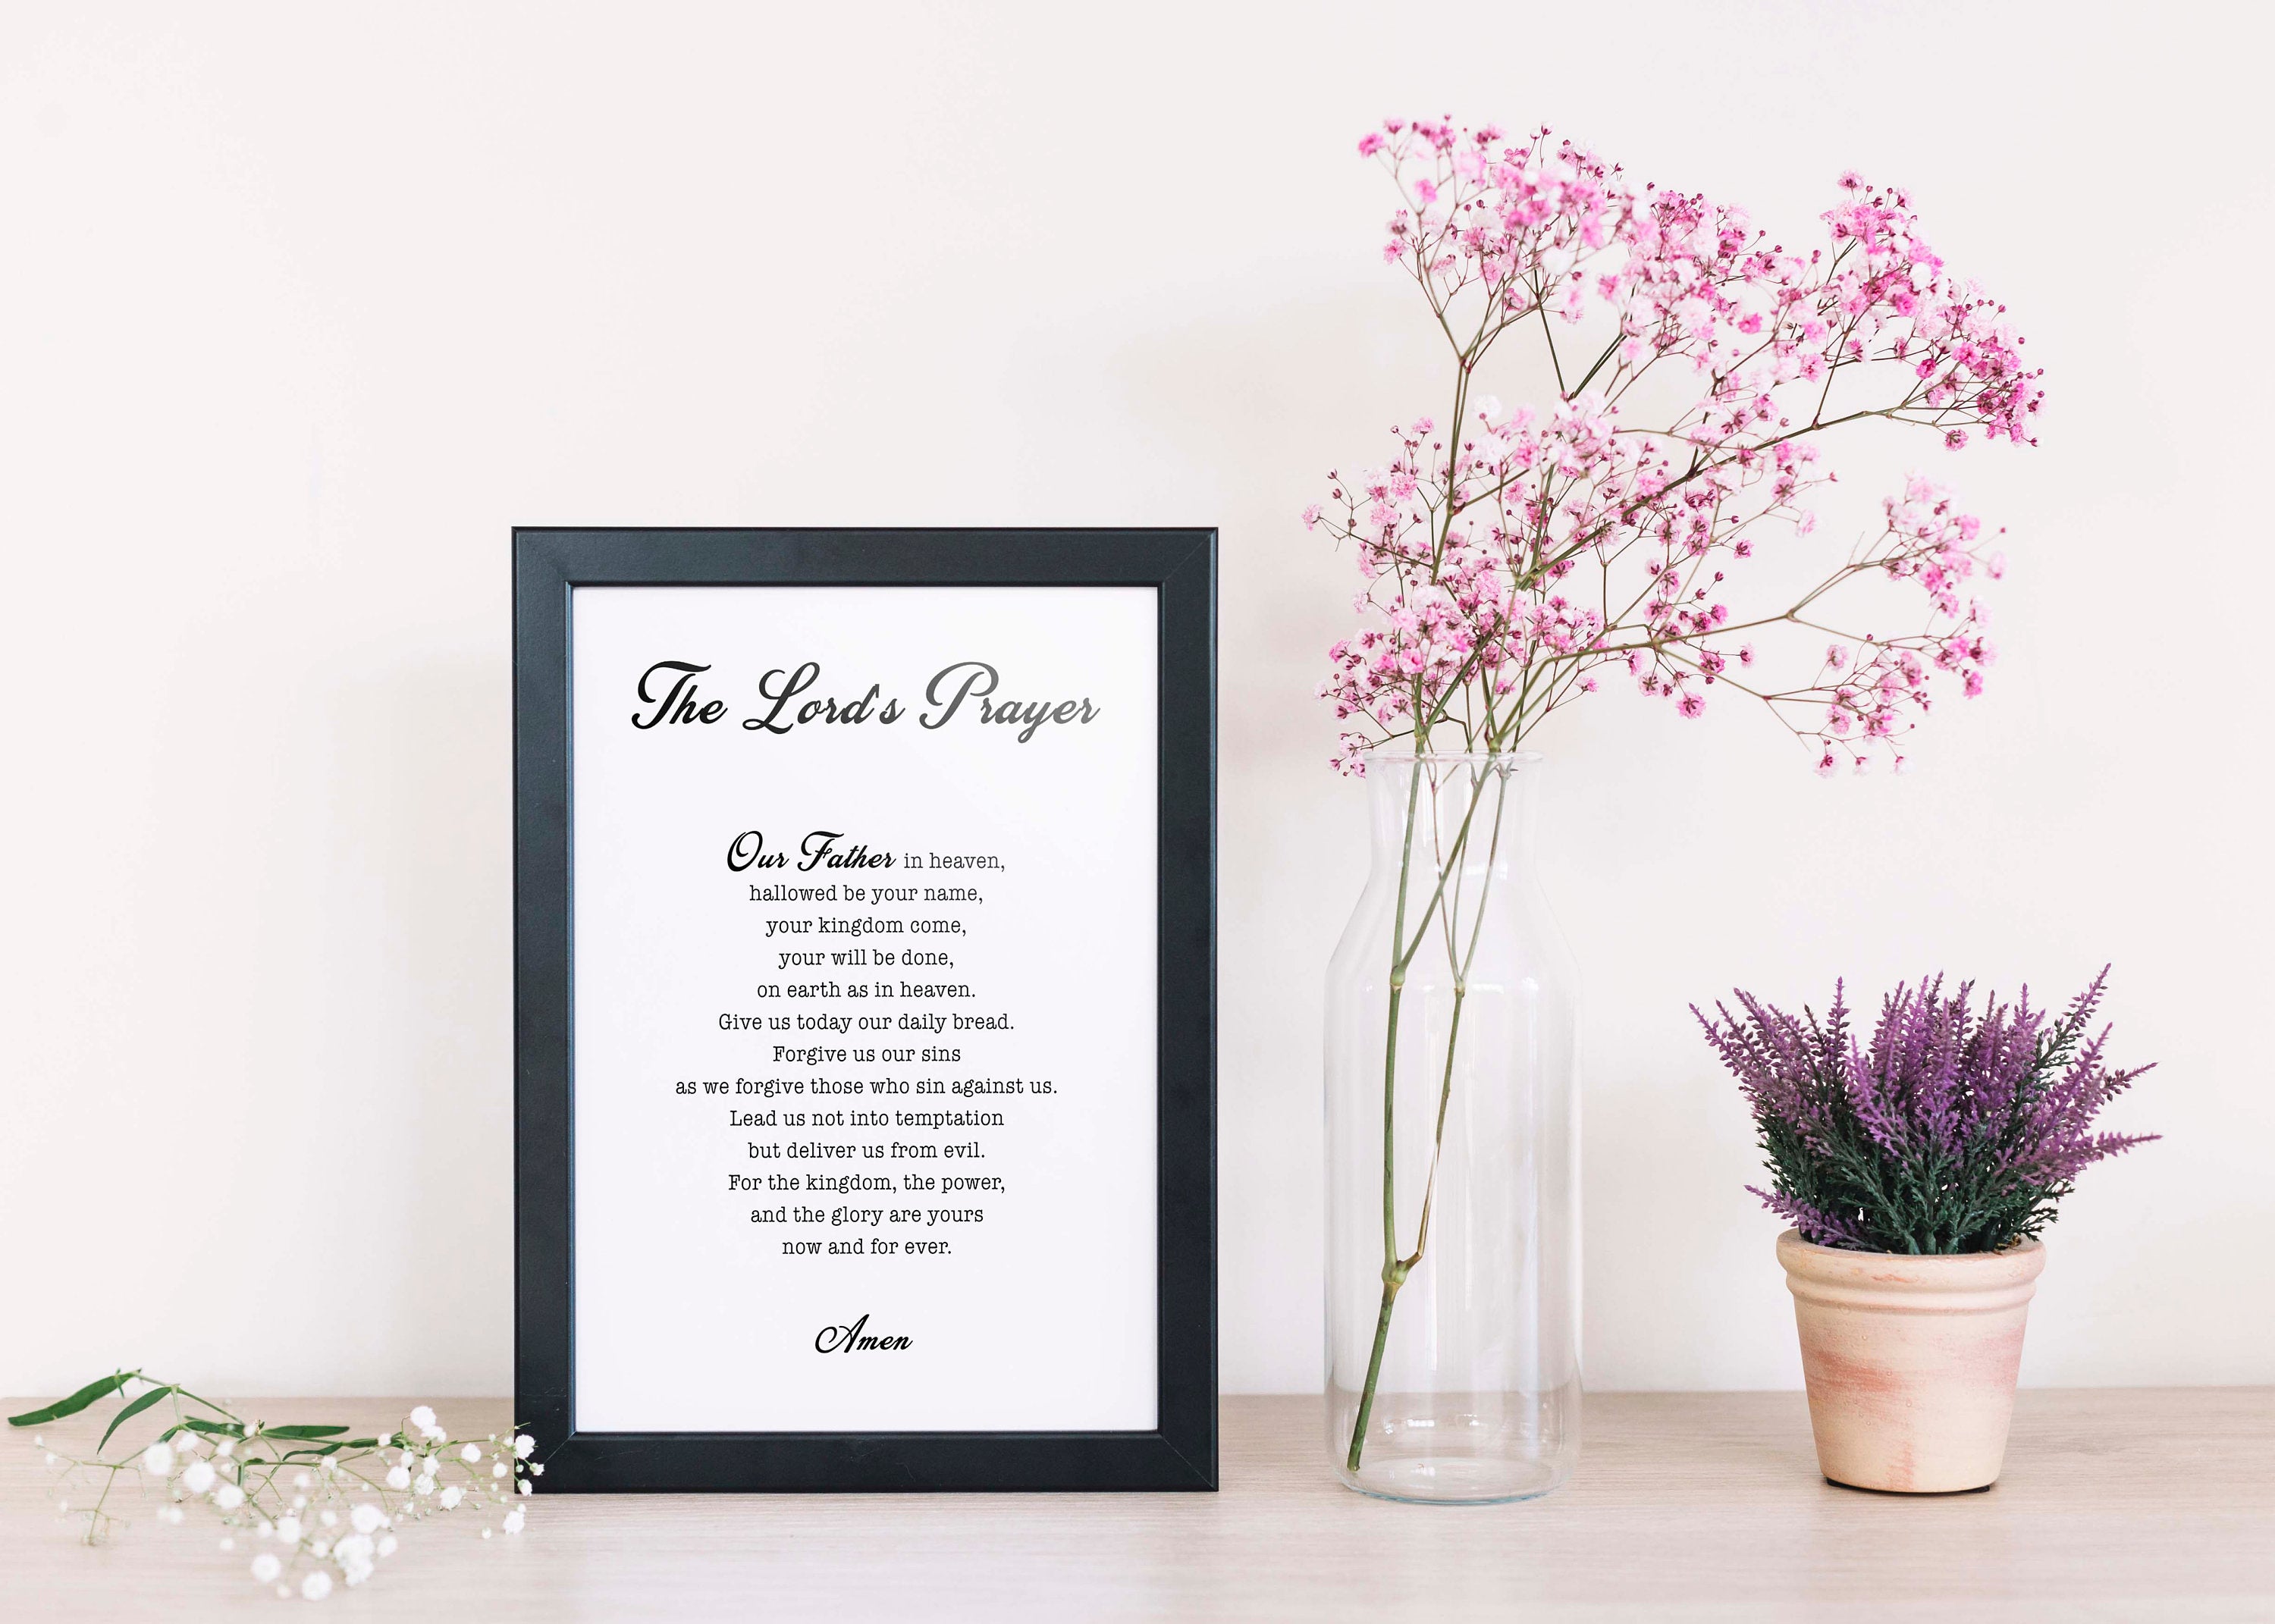 The LORD'S Prayer Art Print in Black & White, Our Father Wall Decor